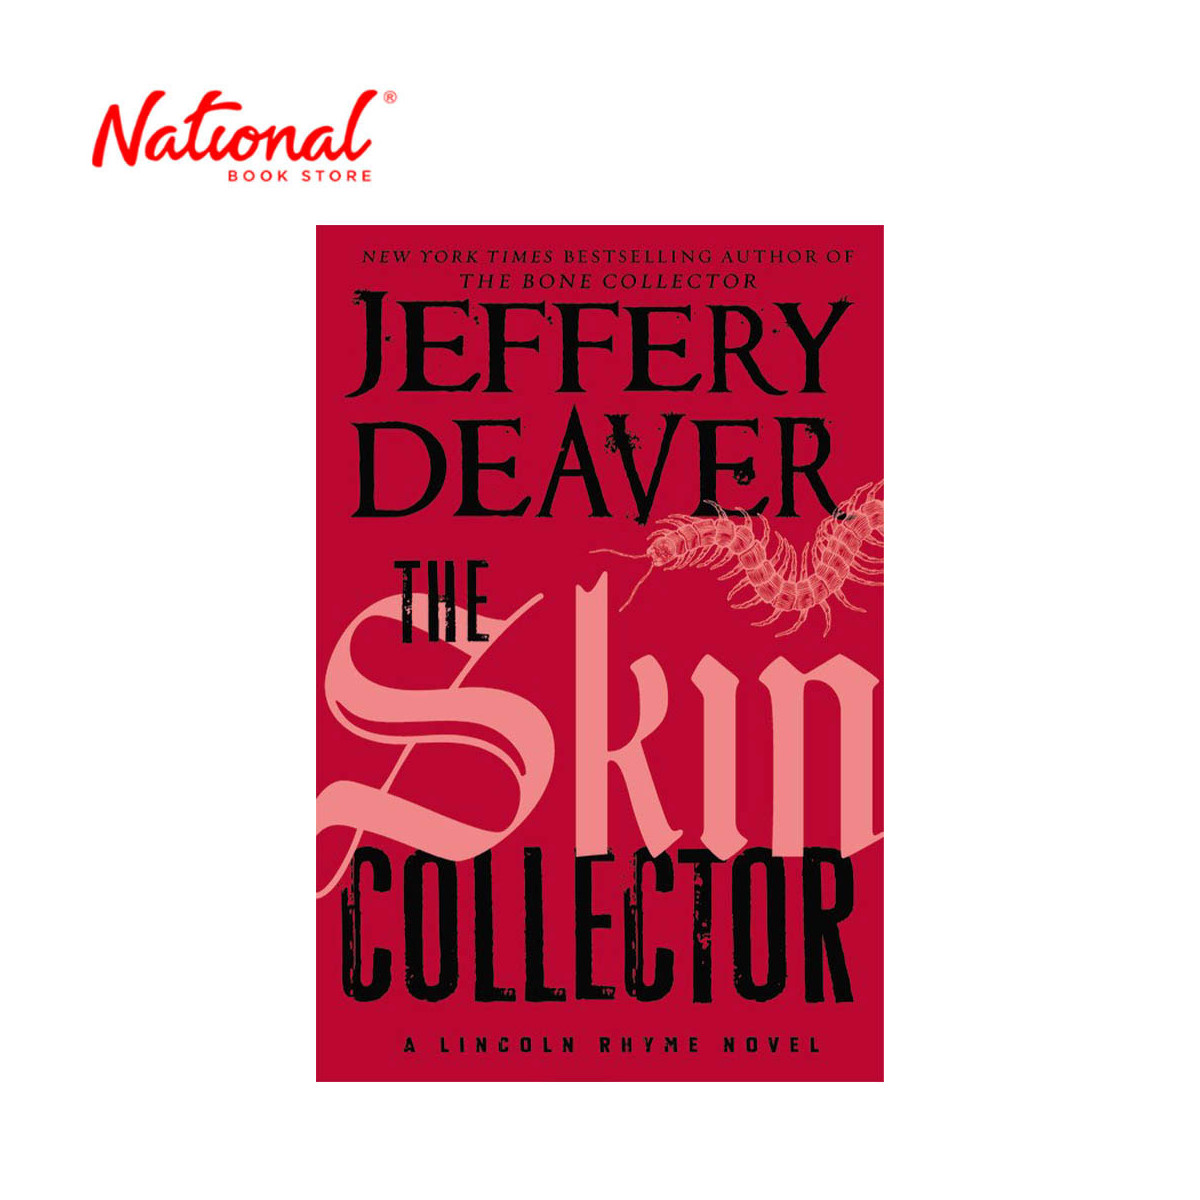 The Skin Collector by Jeffery Deaver - Hardcover - Thriller, Mystery & Suspense